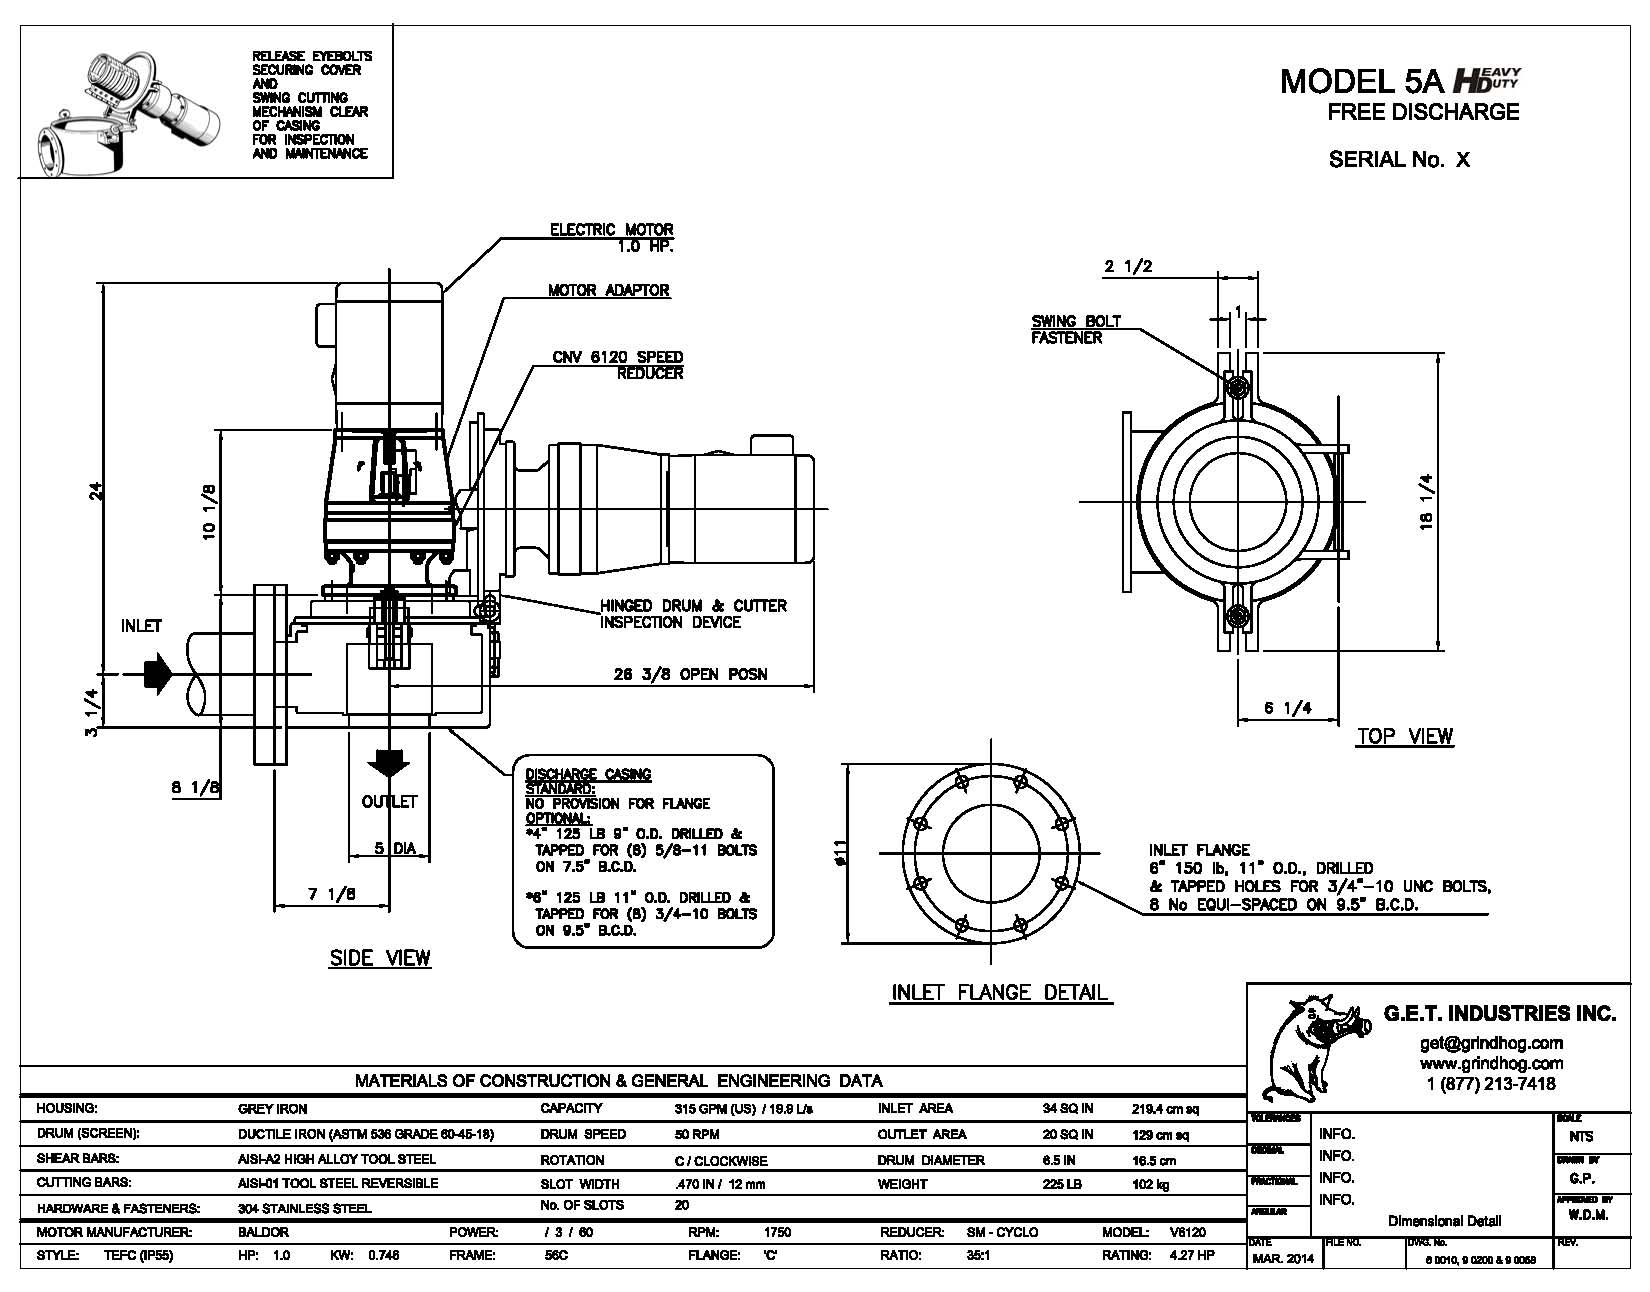 data drawing for Model 5A